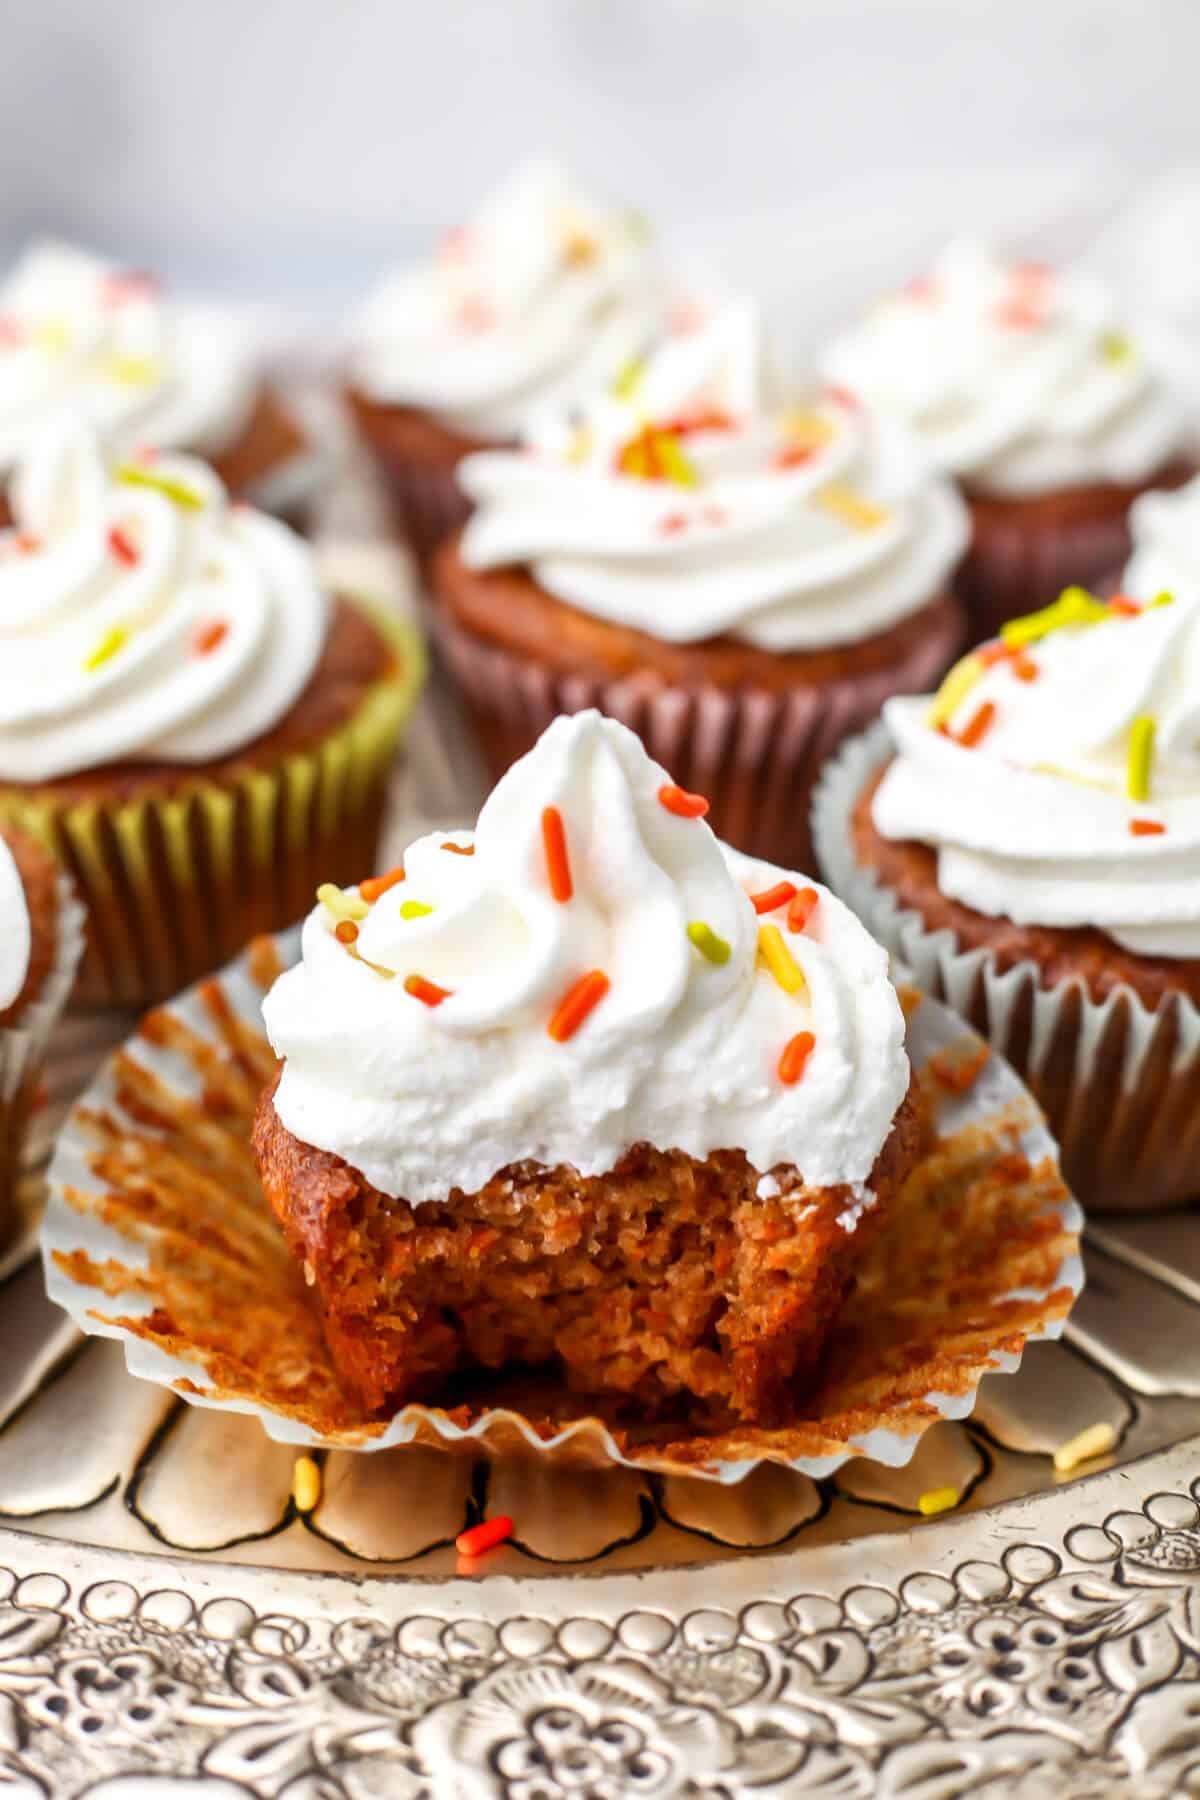 Vegan carrot cake cupcakes with vegan cream cheese frosting with a bite taken out of one of them.